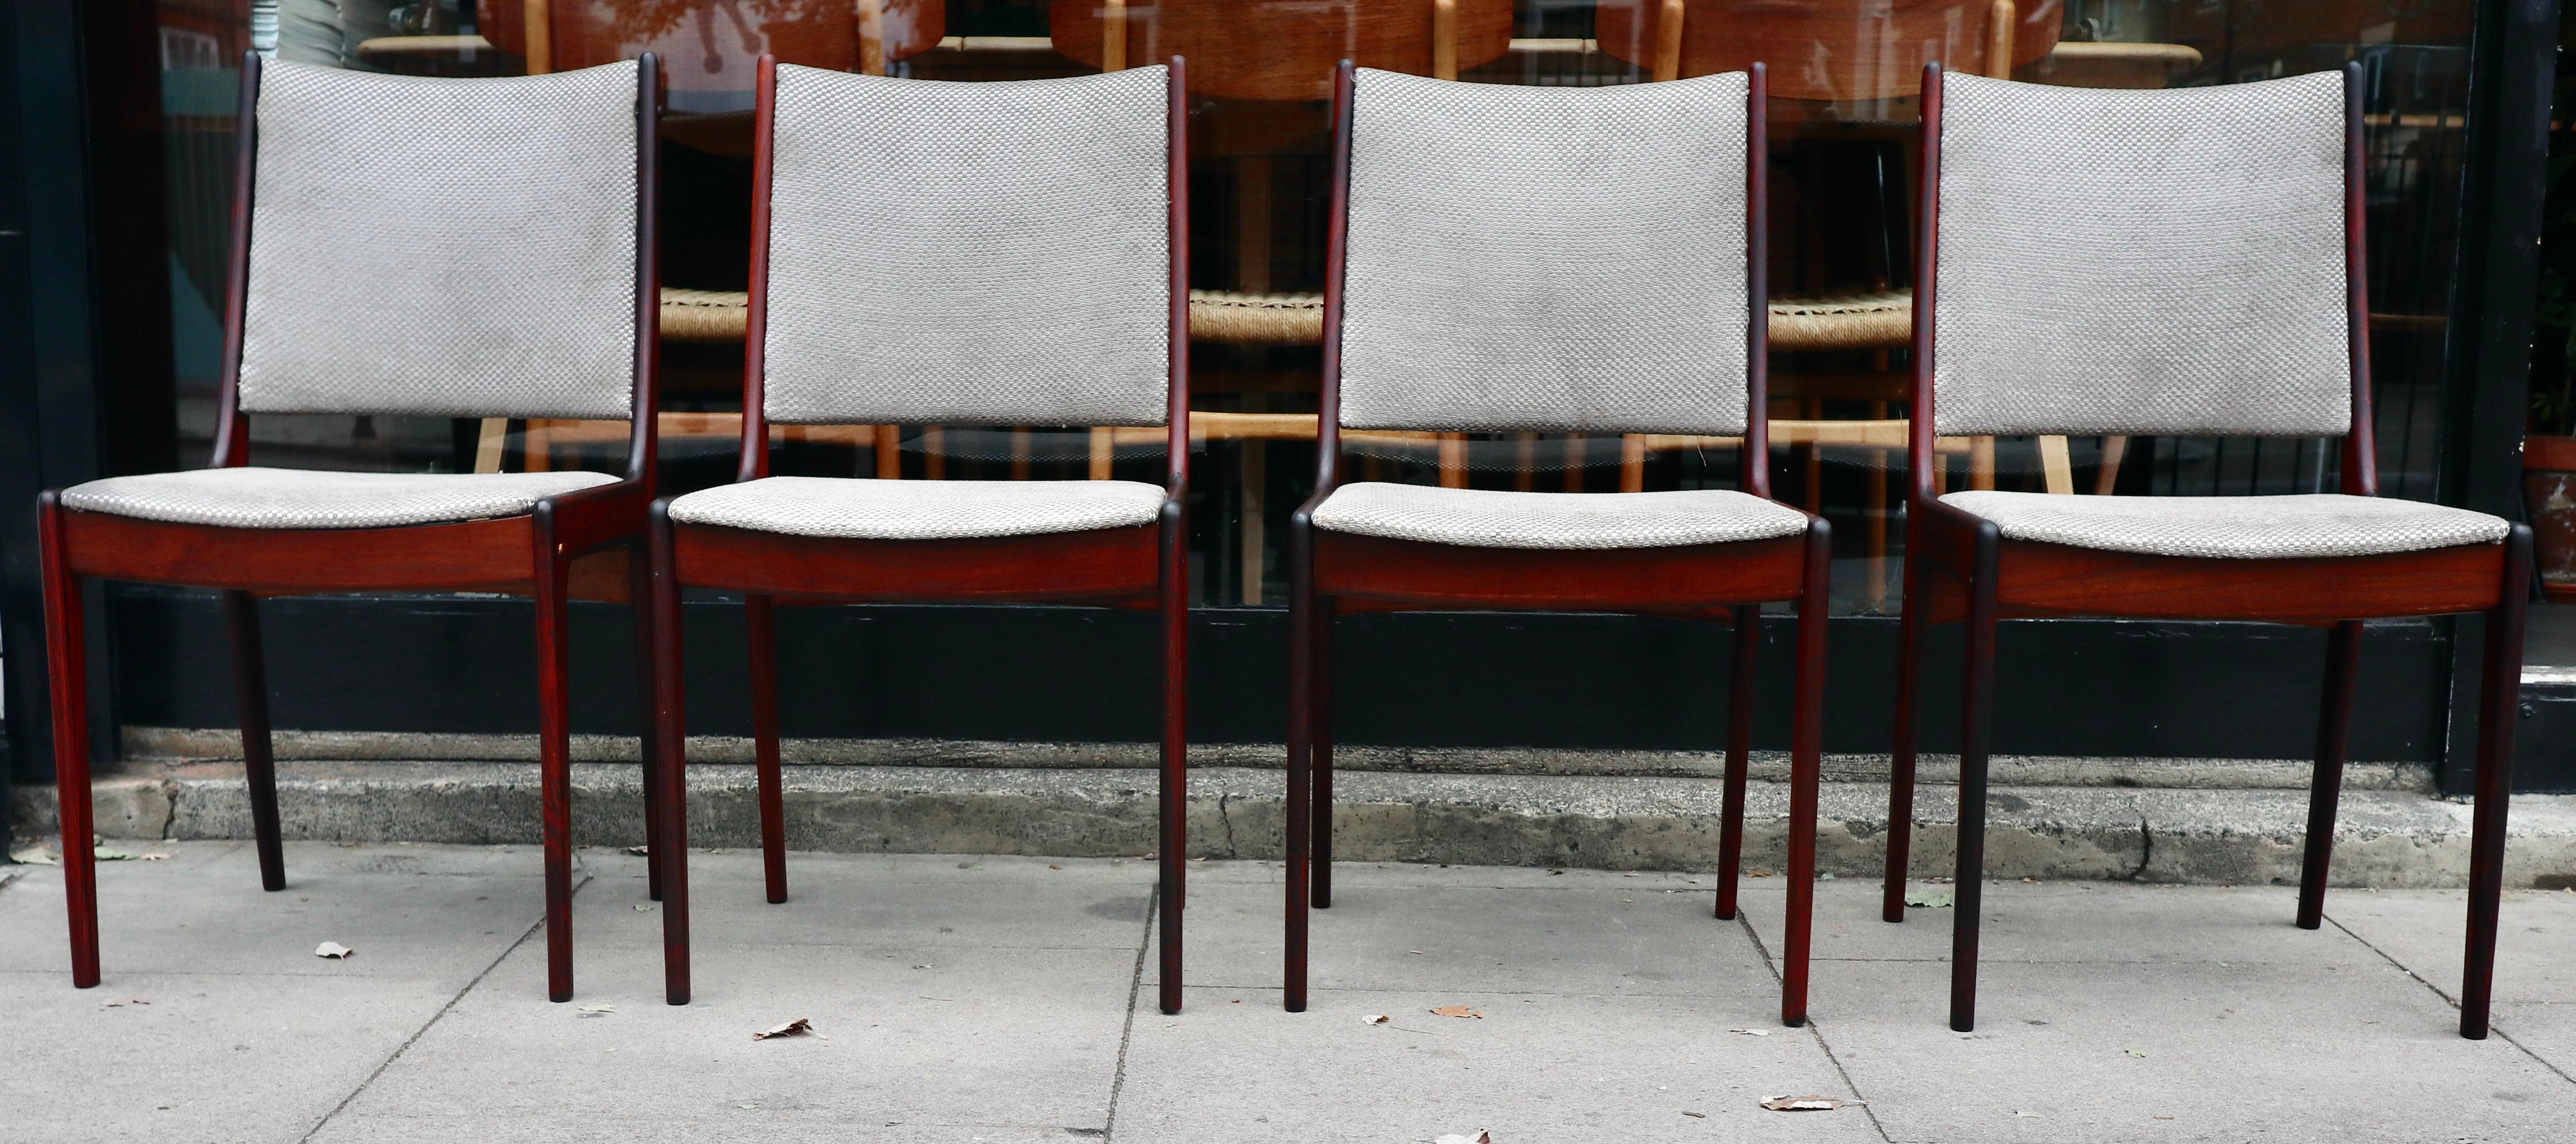 Four rosewood dining Chairs by Johannes Andersen for Uldum Møbelfabrik 1960s For Sale 6